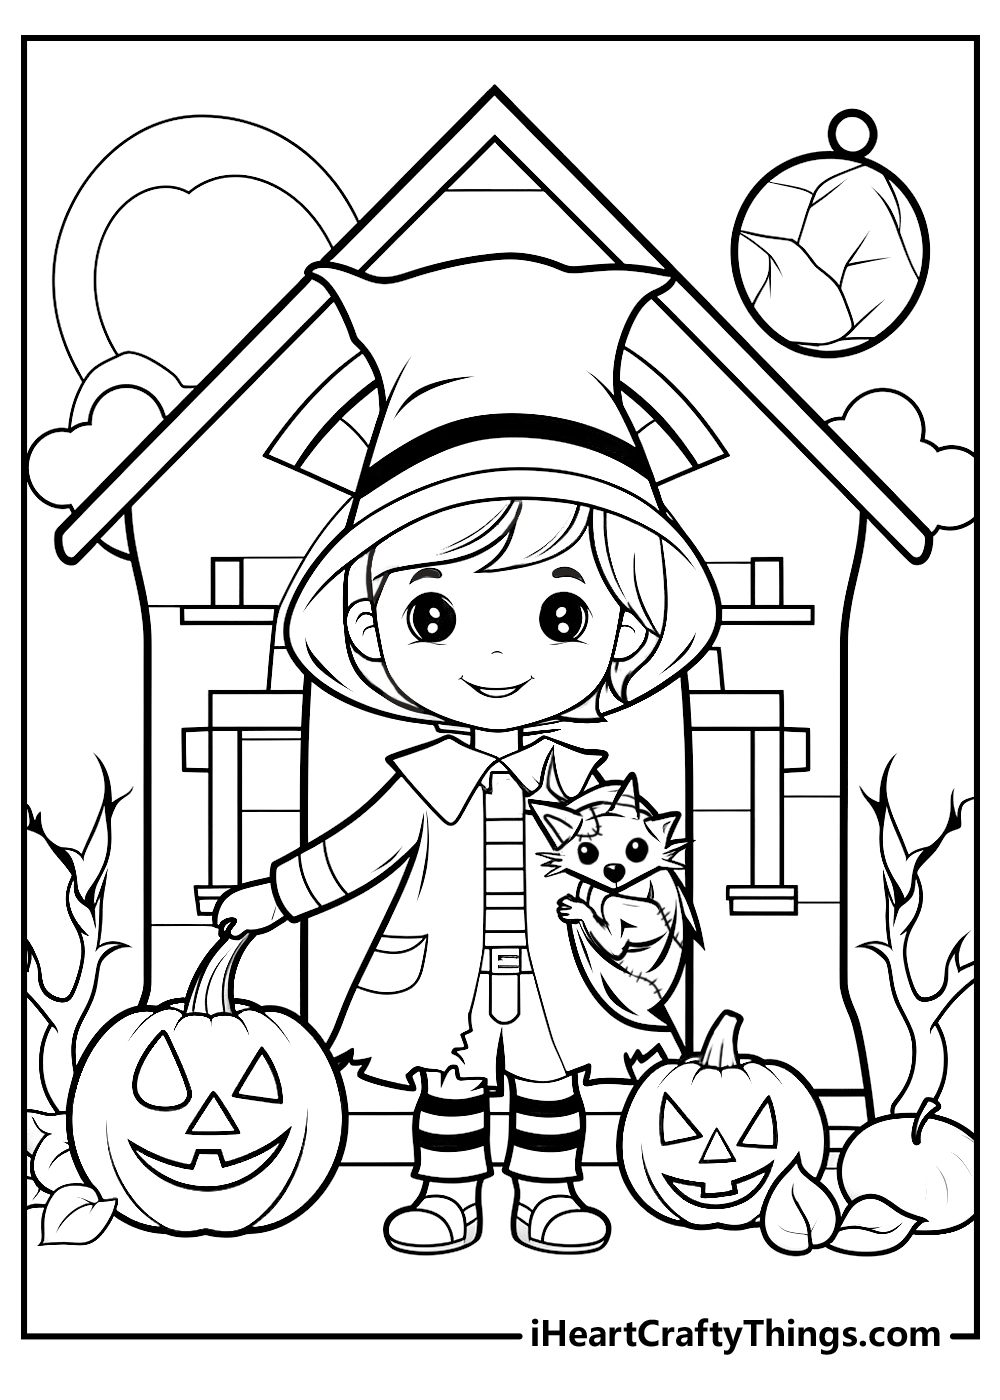 (100% Free Coloring Pages Printables) Trick Or Treat